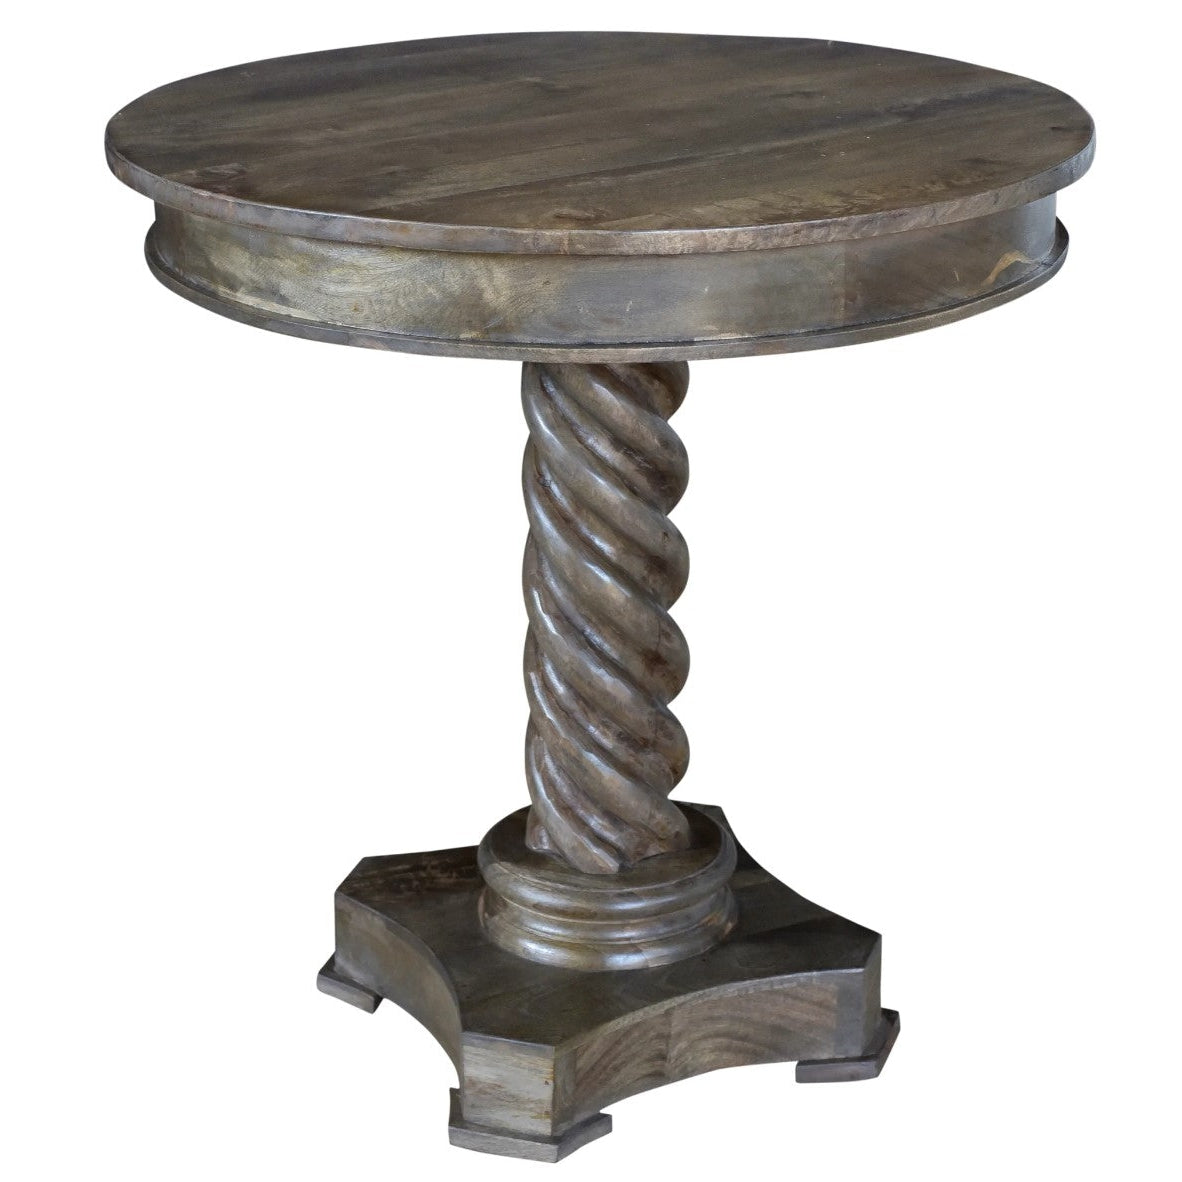 Crestview Collection Bengal Manor 30" x 30" x 30" Rustic Mango Wood Carved Rope Twist Accent Table In Natural Wood Finish